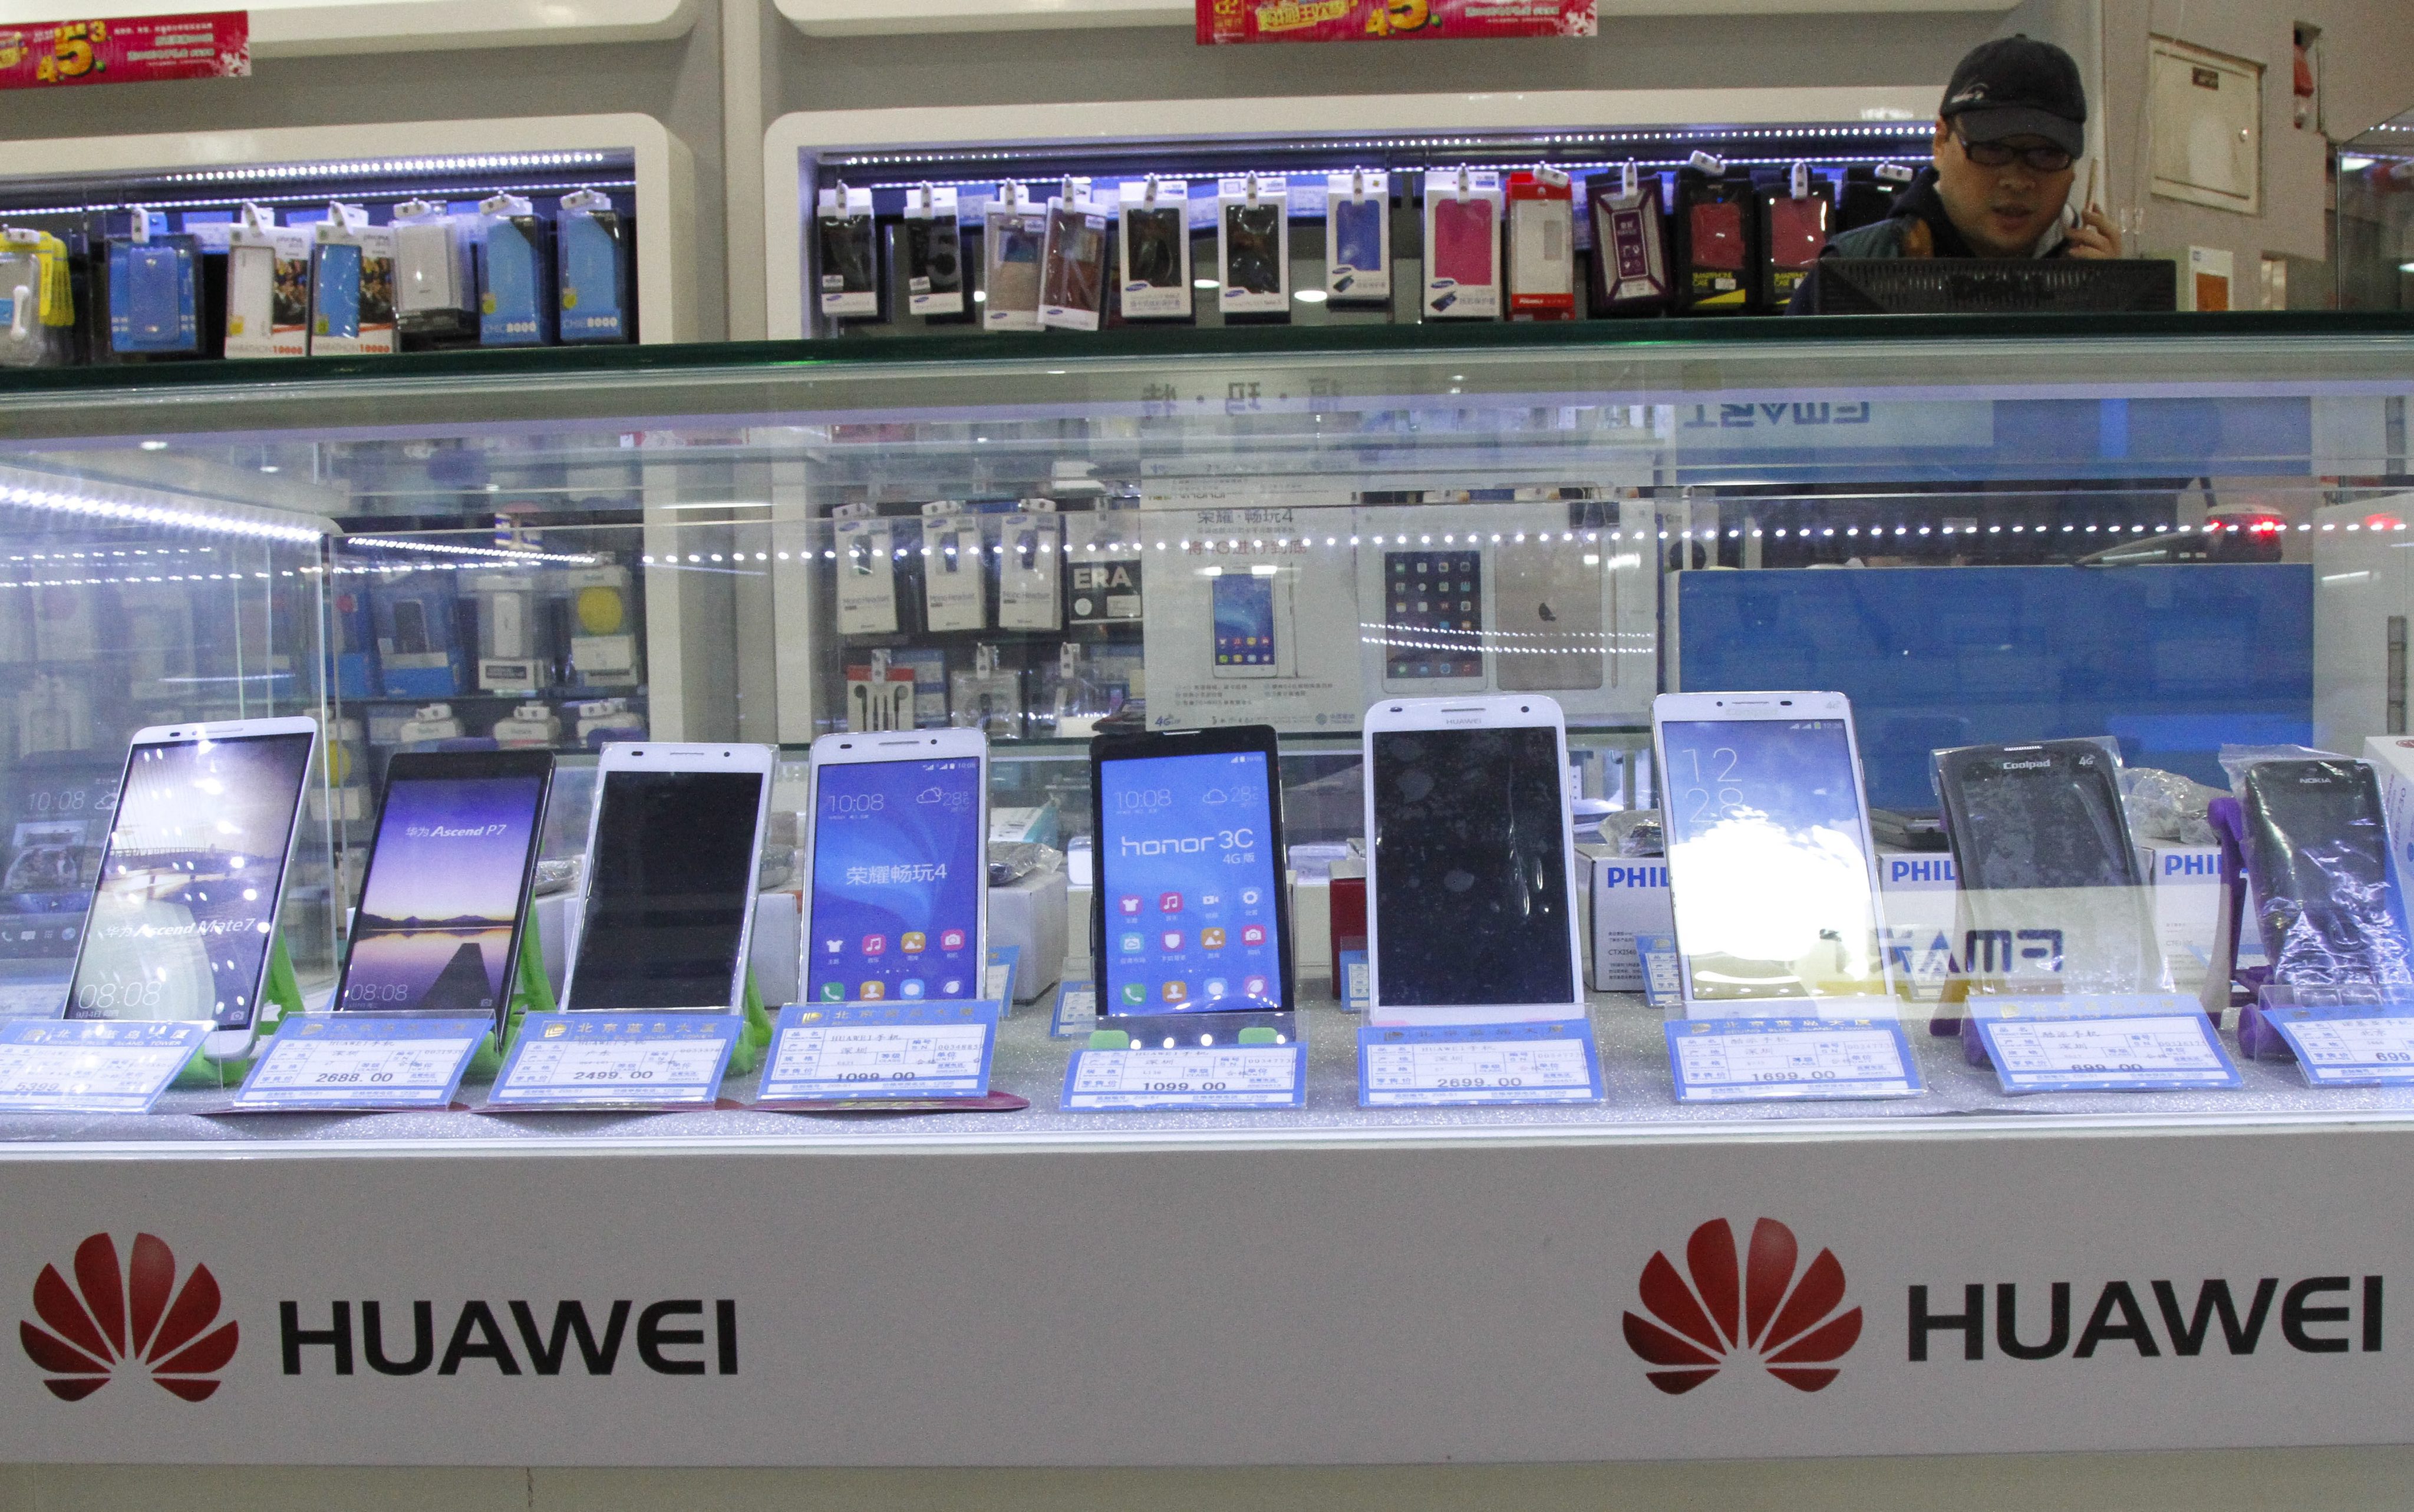 Huawei smartphone products are displayed for sale with other brands at a shopping mall in Beijing, China. Photo: EPA